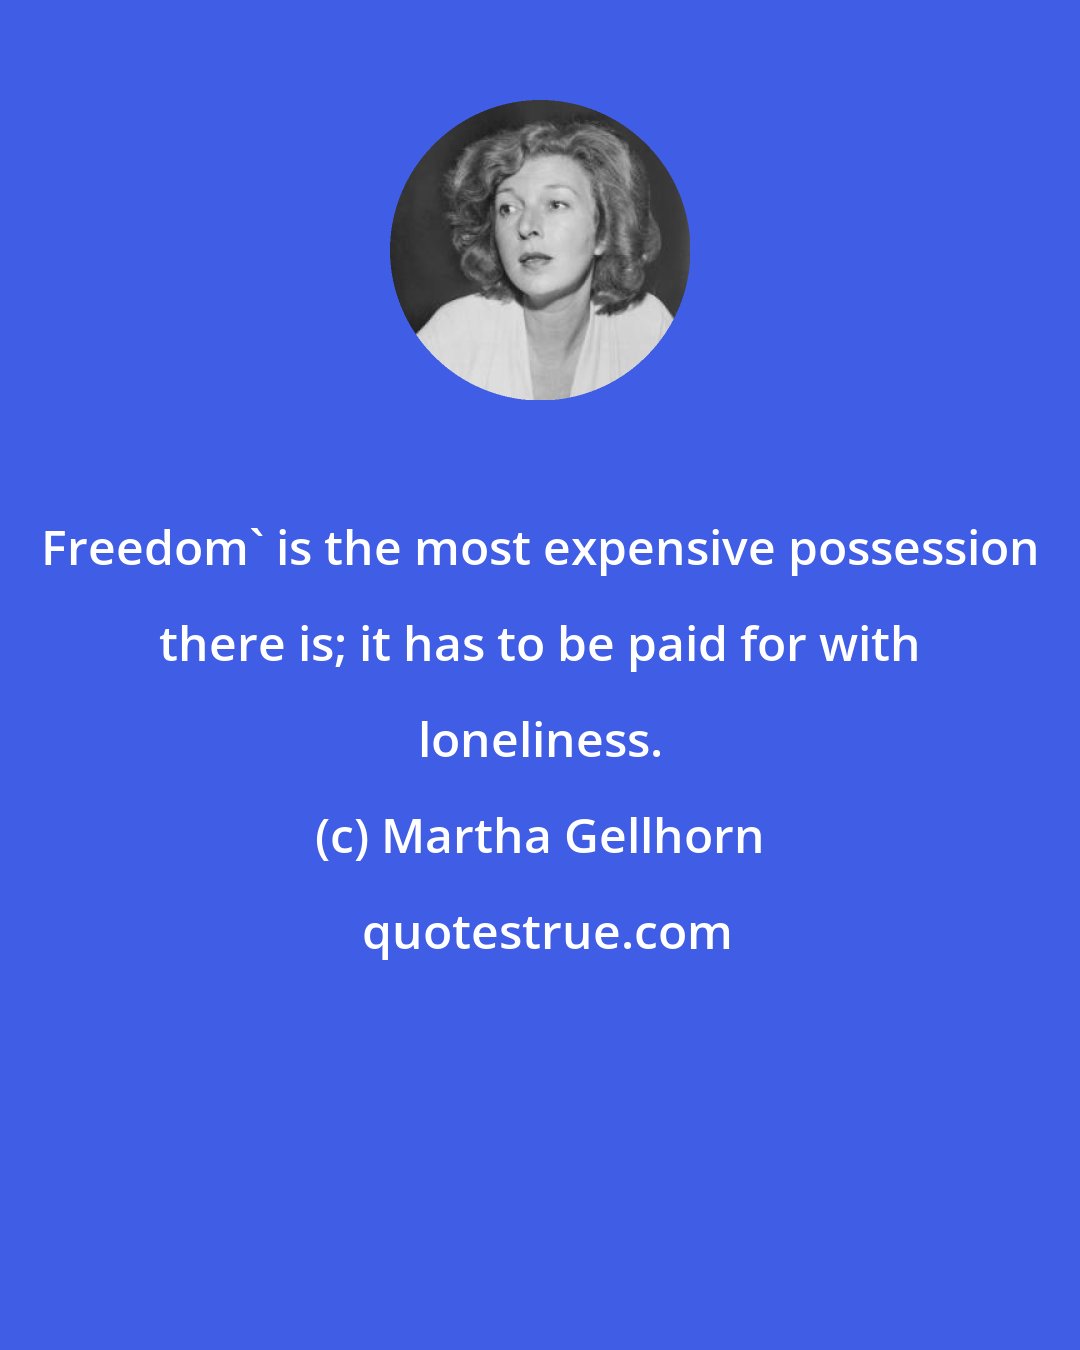 Martha Gellhorn: Freedom' is the most expensive possession there is; it has to be paid for with loneliness.